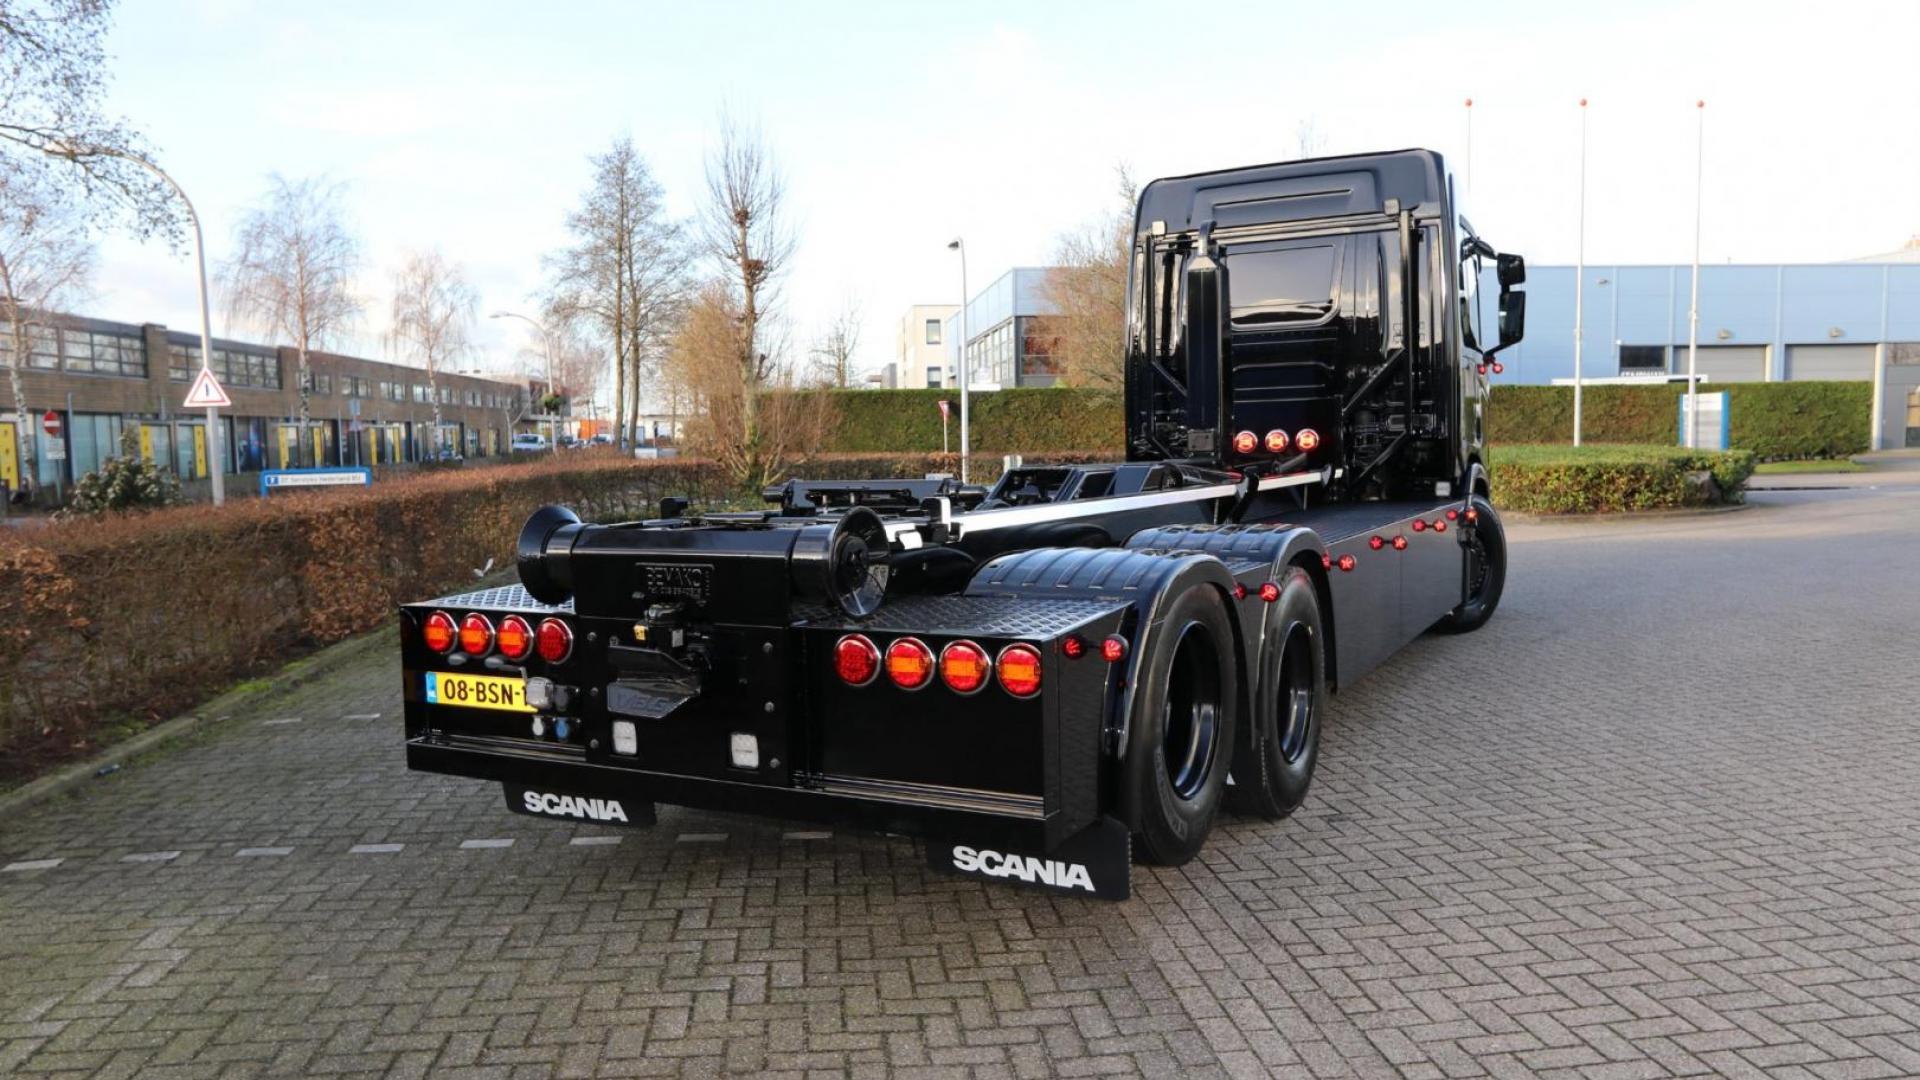 Black Beauty spotted in the Netherlands!